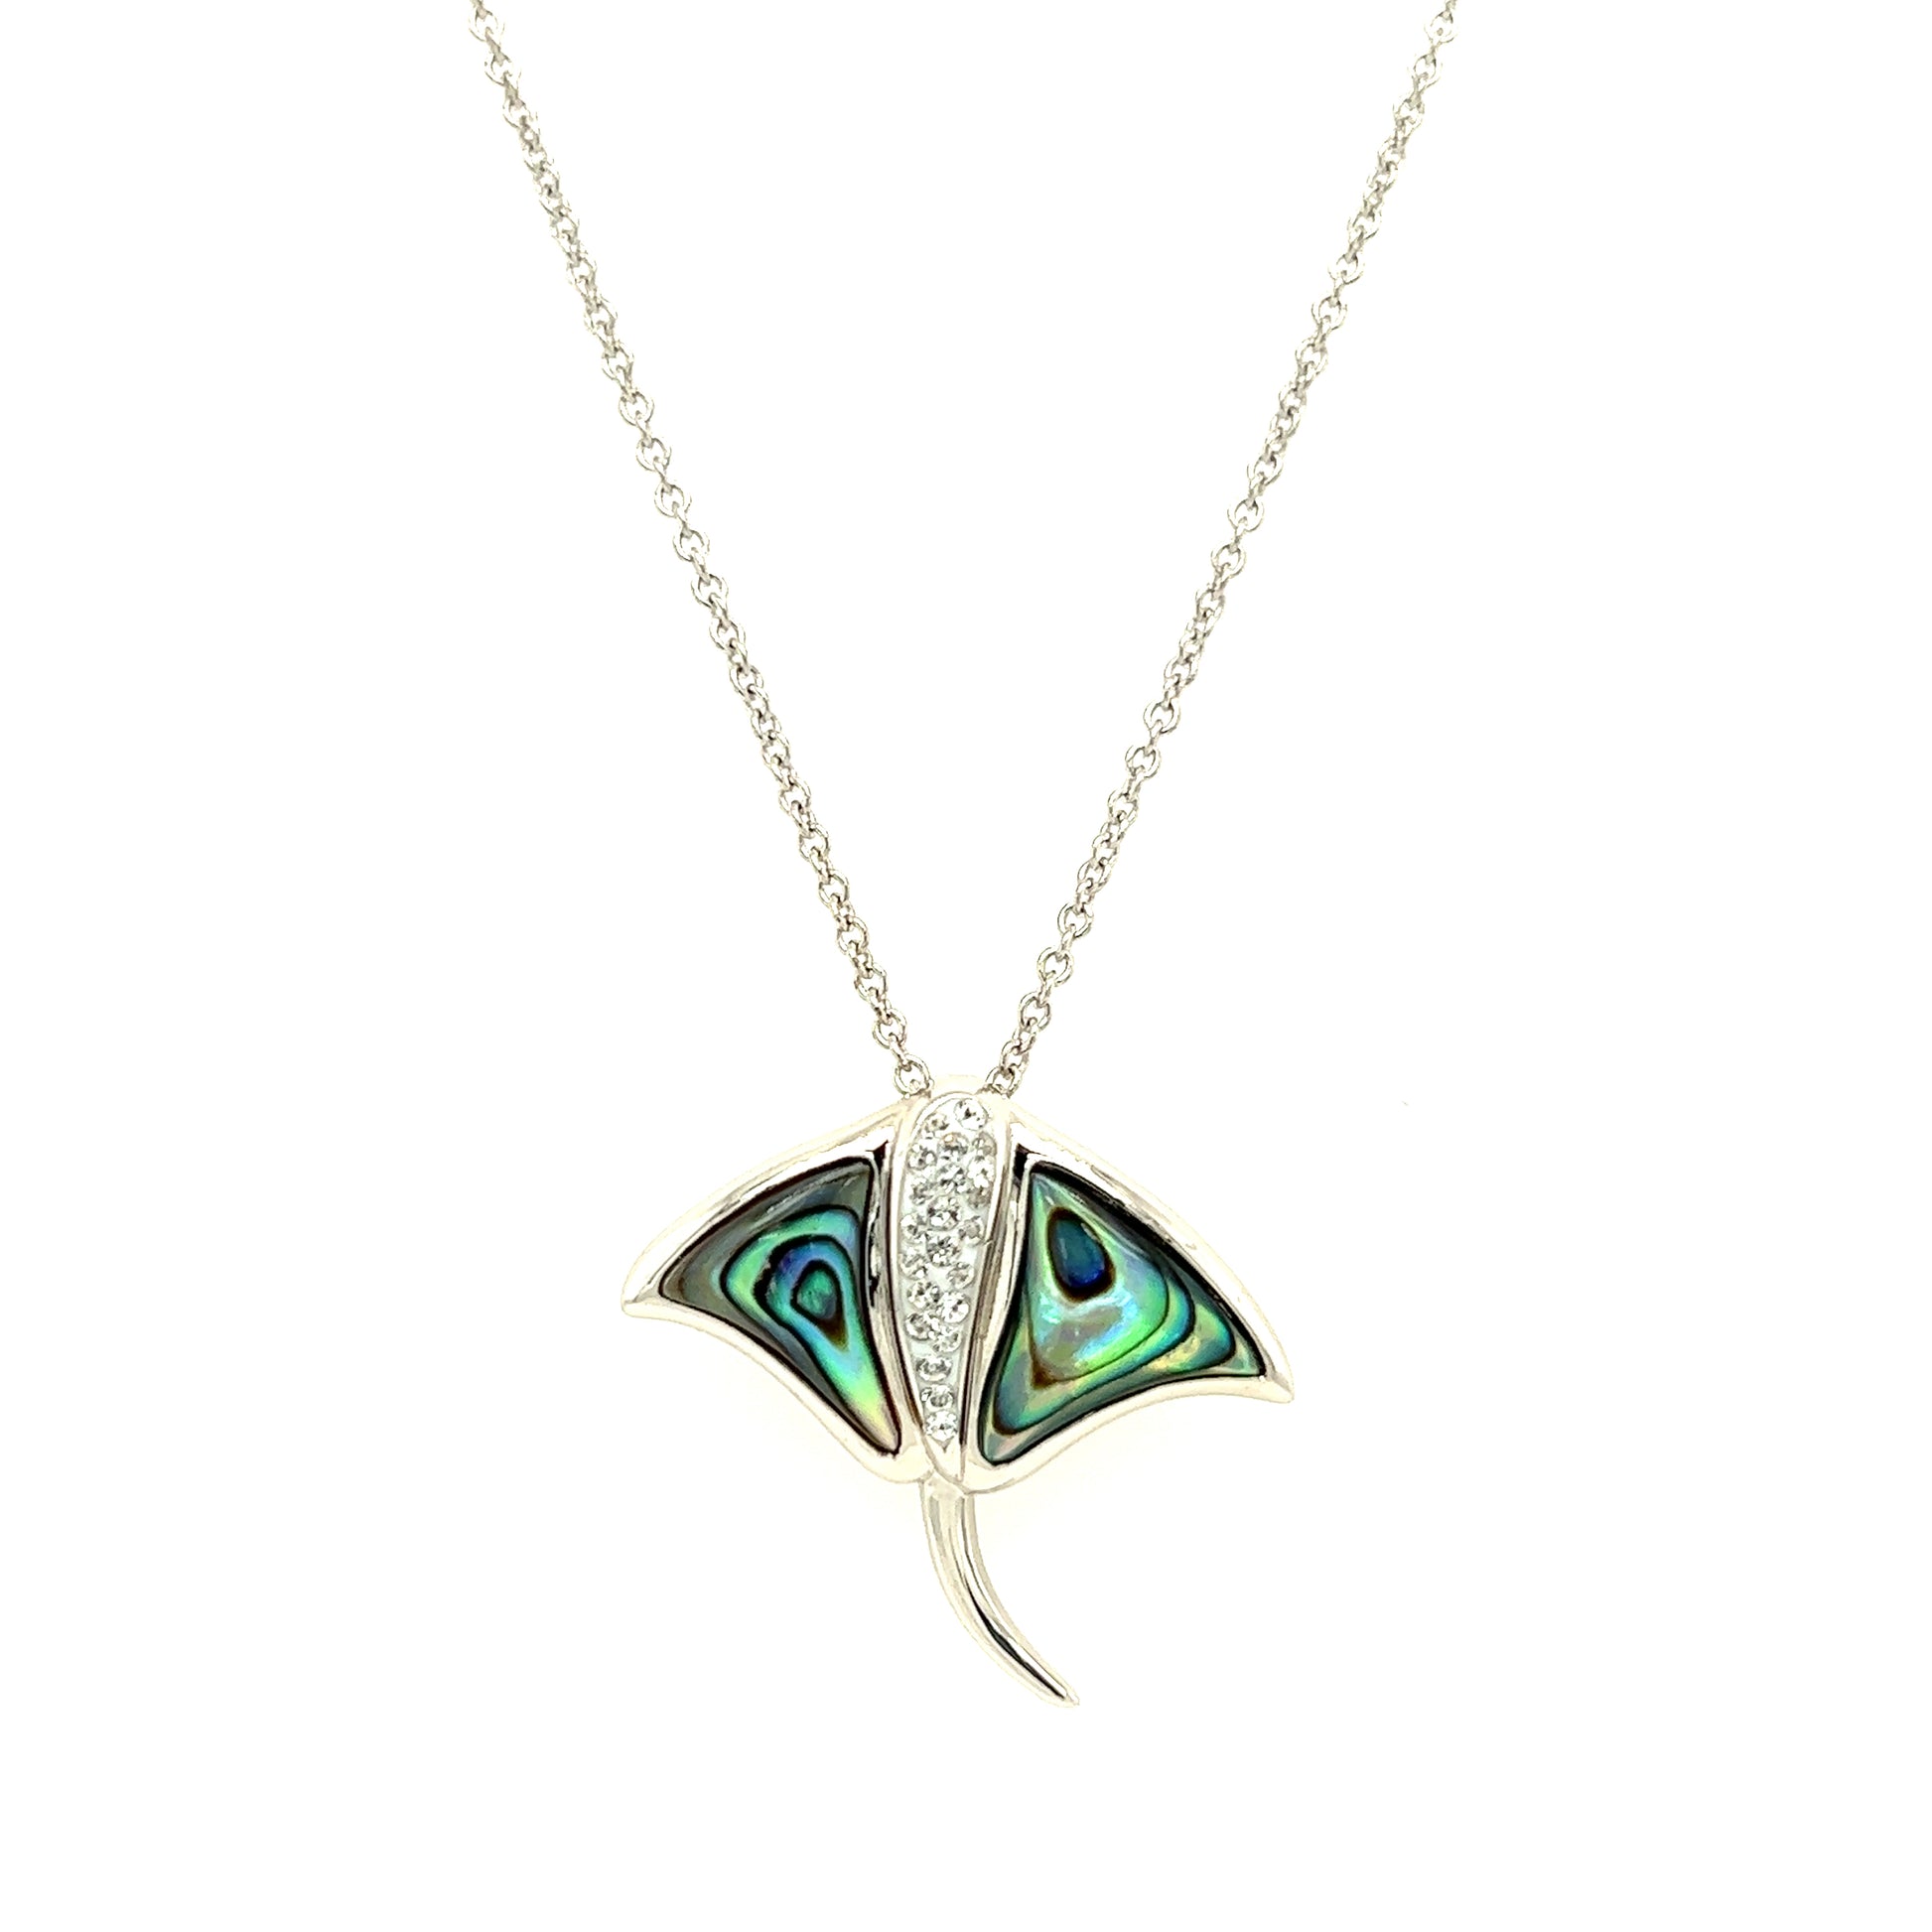 Manta Ray Necklace with Abalone Shell and White Crystals in Sterling Silver Front View